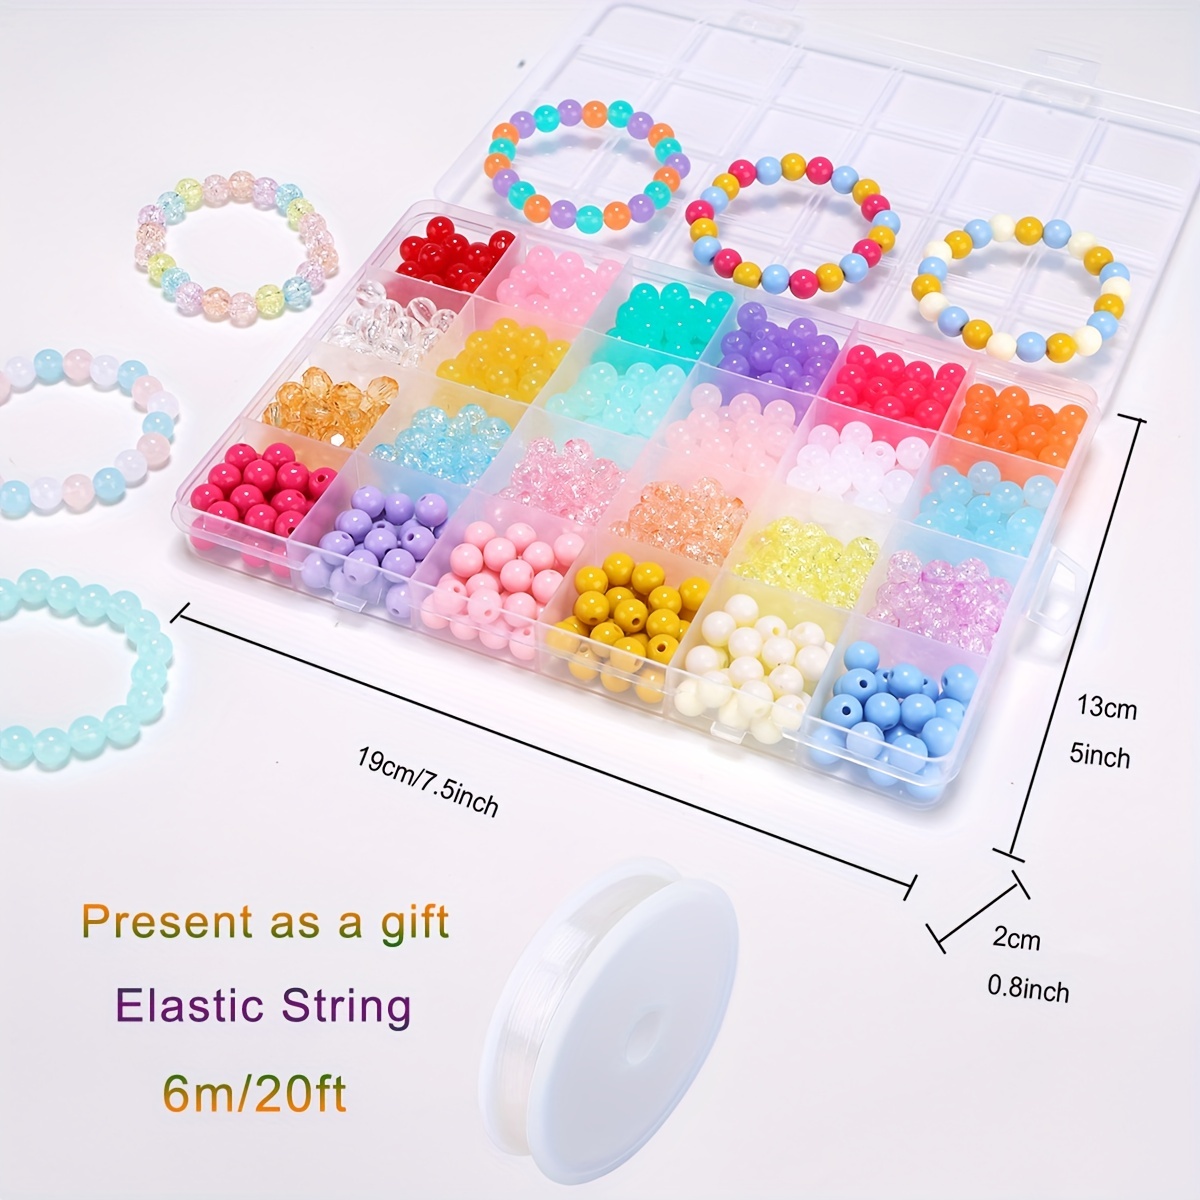 CraftyBook 7500pc Beads Bracelet Making Kits with Small Glass and